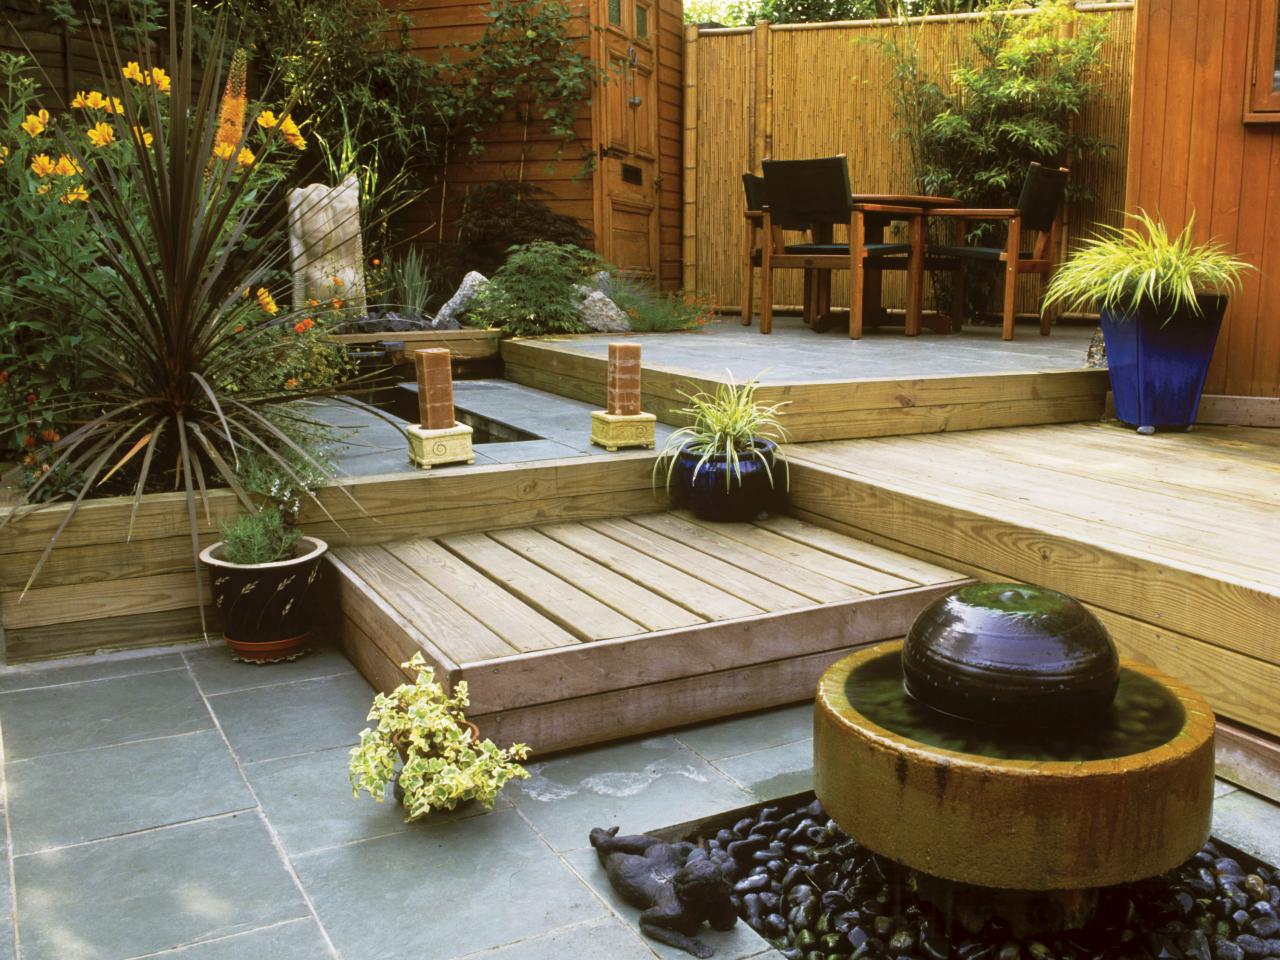 Potted Plants Concept Fetching Potted Plants And Flooring Concept For Small Backyard Ideas At Exterior Rustic Design Backyard Small Backyard Ideas For You Who Love Simplicity